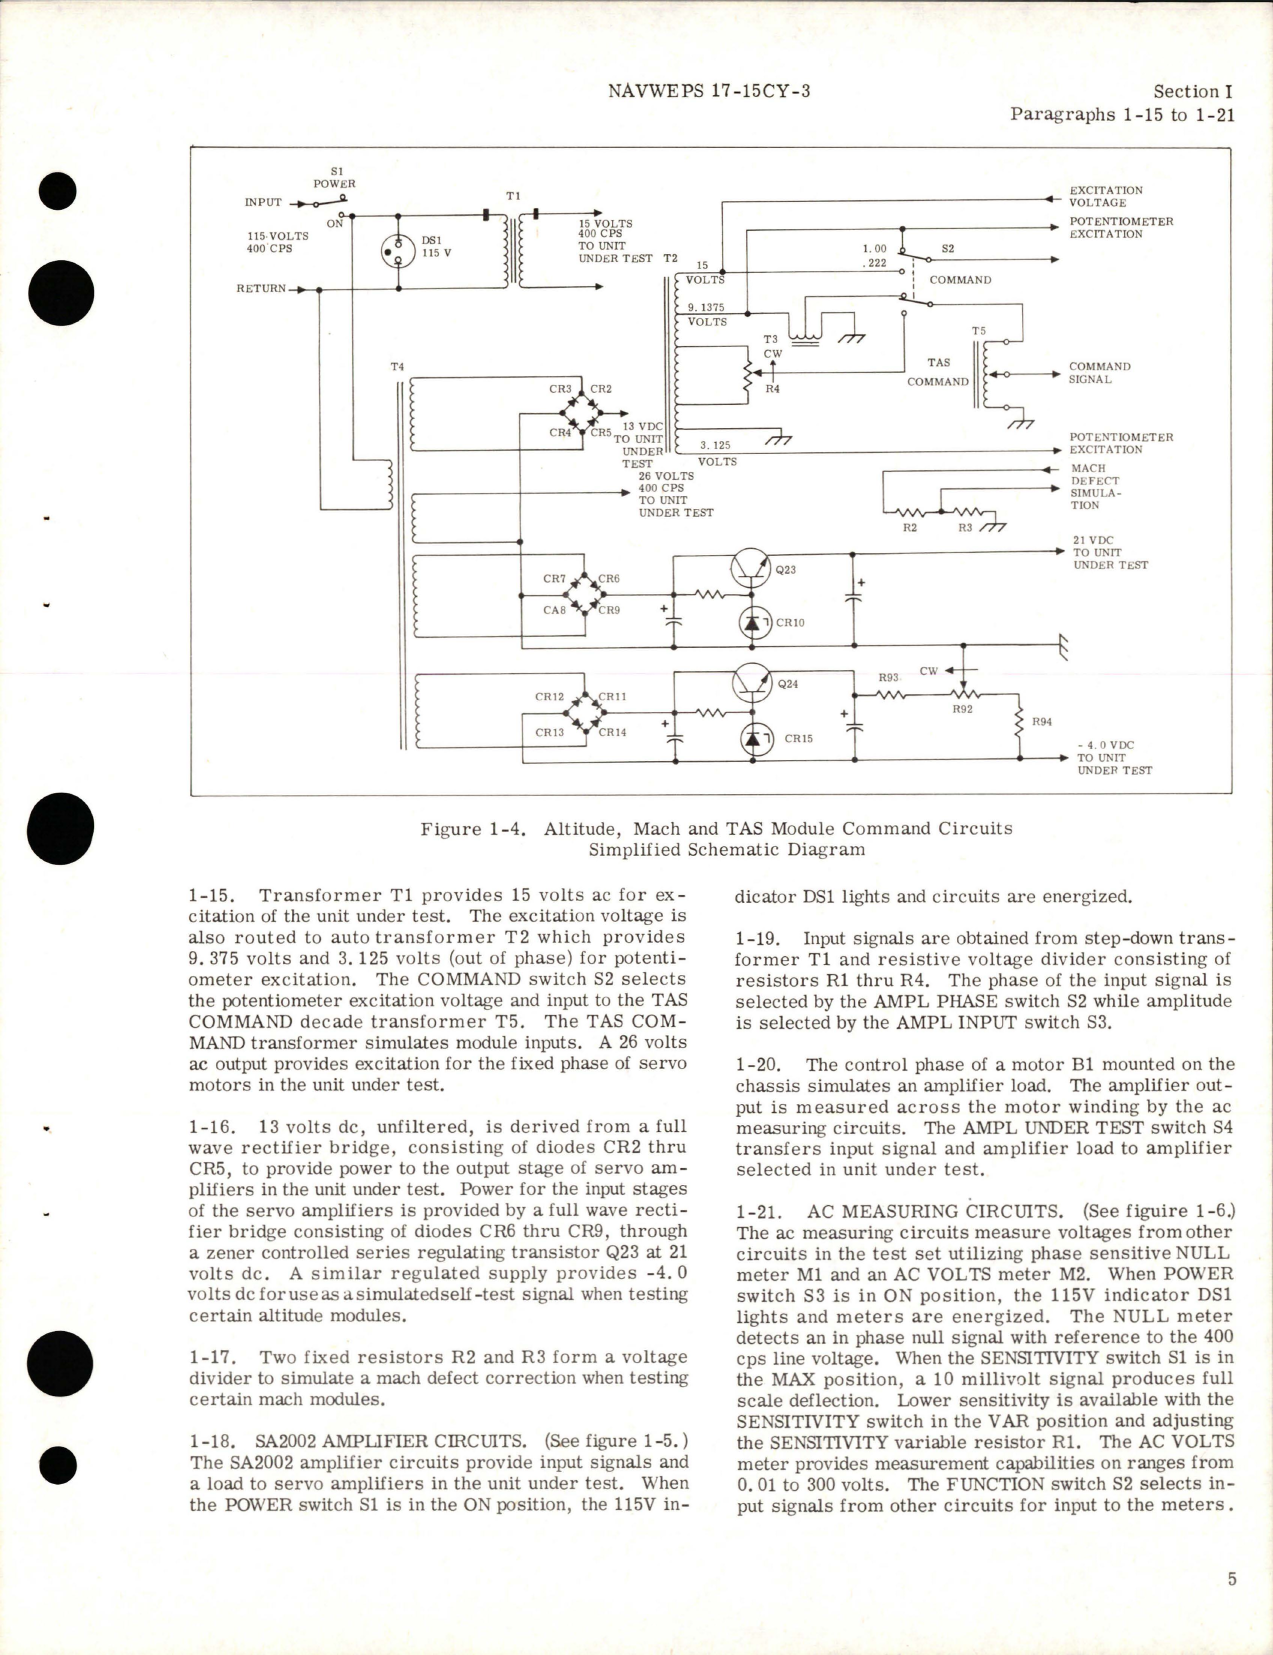 Sample page 9 from AirCorps Library document: Operation and Service Instructions with Parts for Air Data Computers Test Set - Type WS2079-1, Part 818788-1 